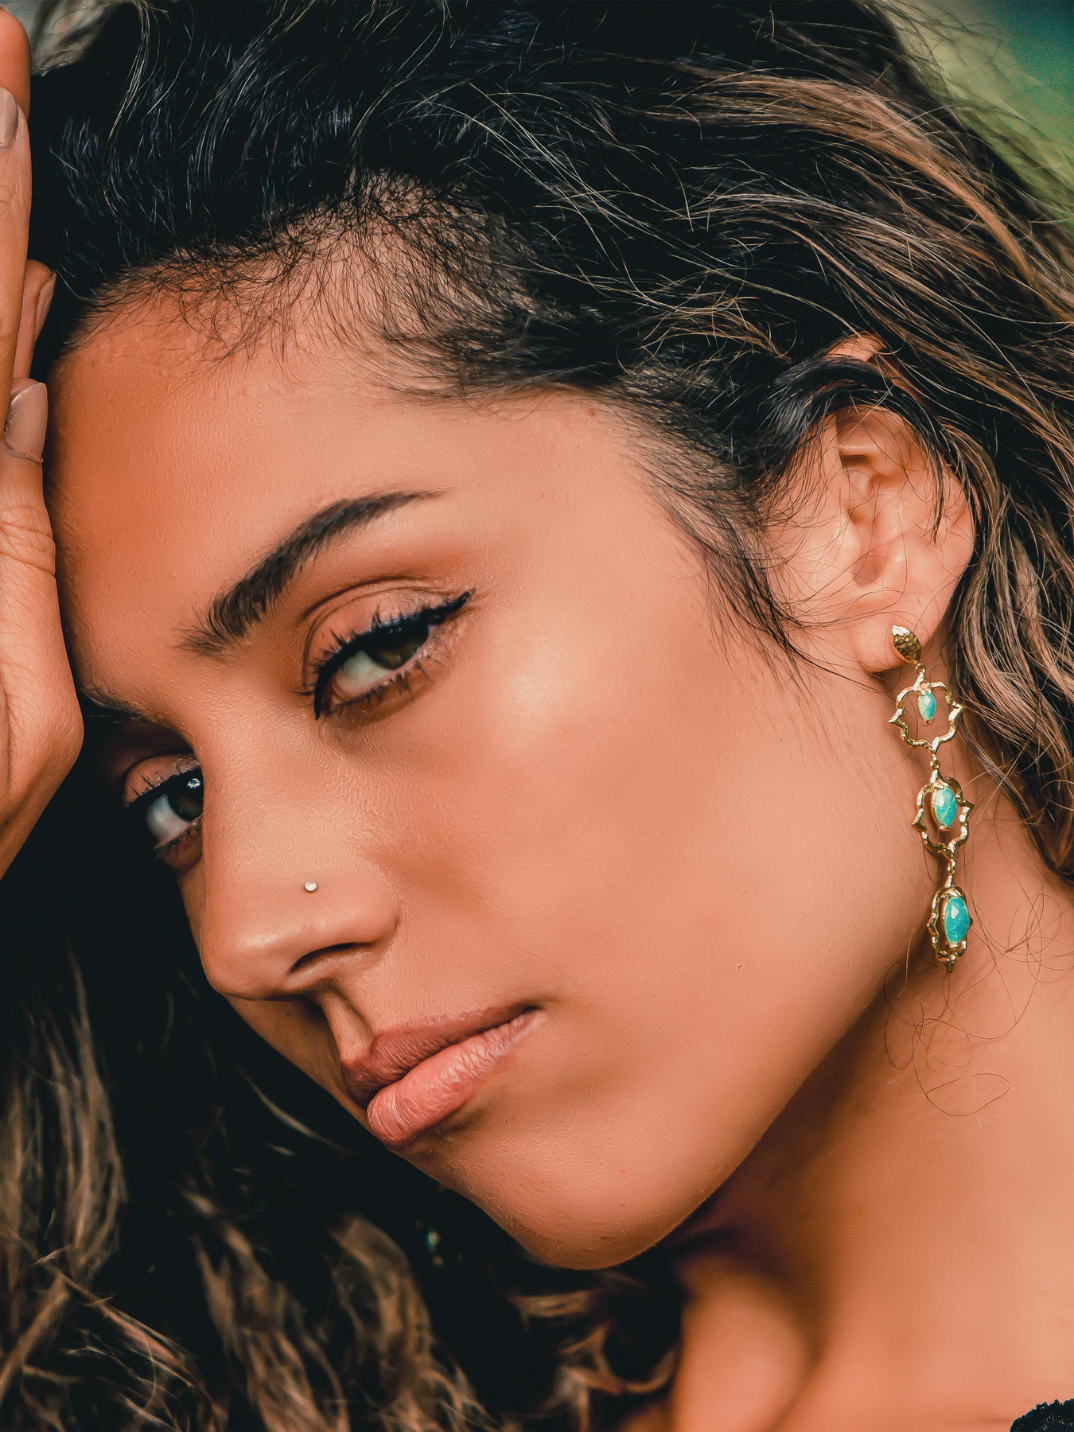 Capturing India’s beautiful architecture & our love for nature our Chrysoprase cocktail earrings will take you on an adventurous journey. An irreplaceable pair starring the semi precious stone Chrysoprase with vermeil gold to enhance any outfit.